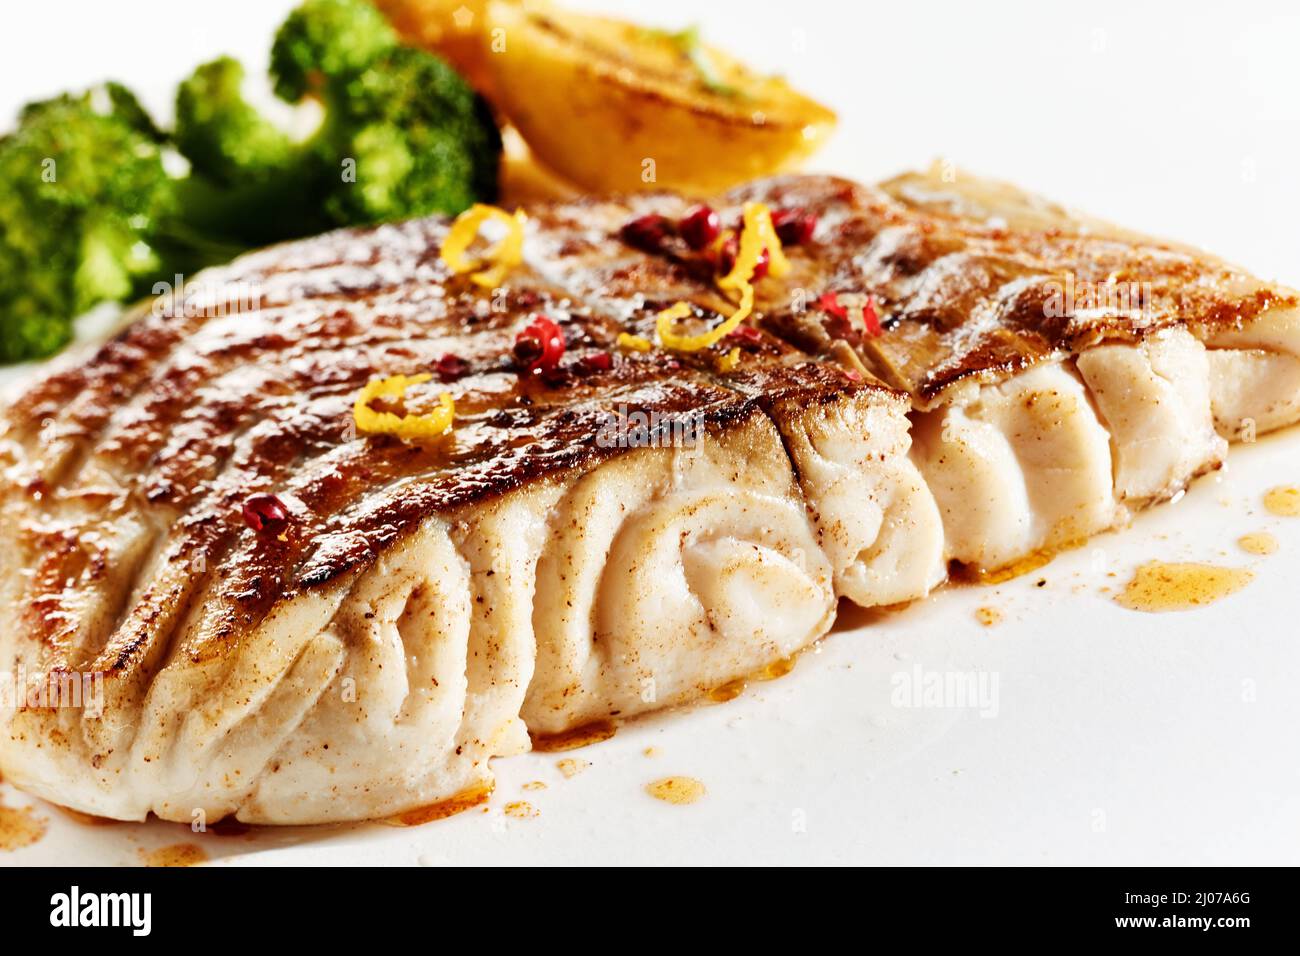 Closeup of nutritious grilled fish fillet and vegetables served on white background for lunch Stock Photo